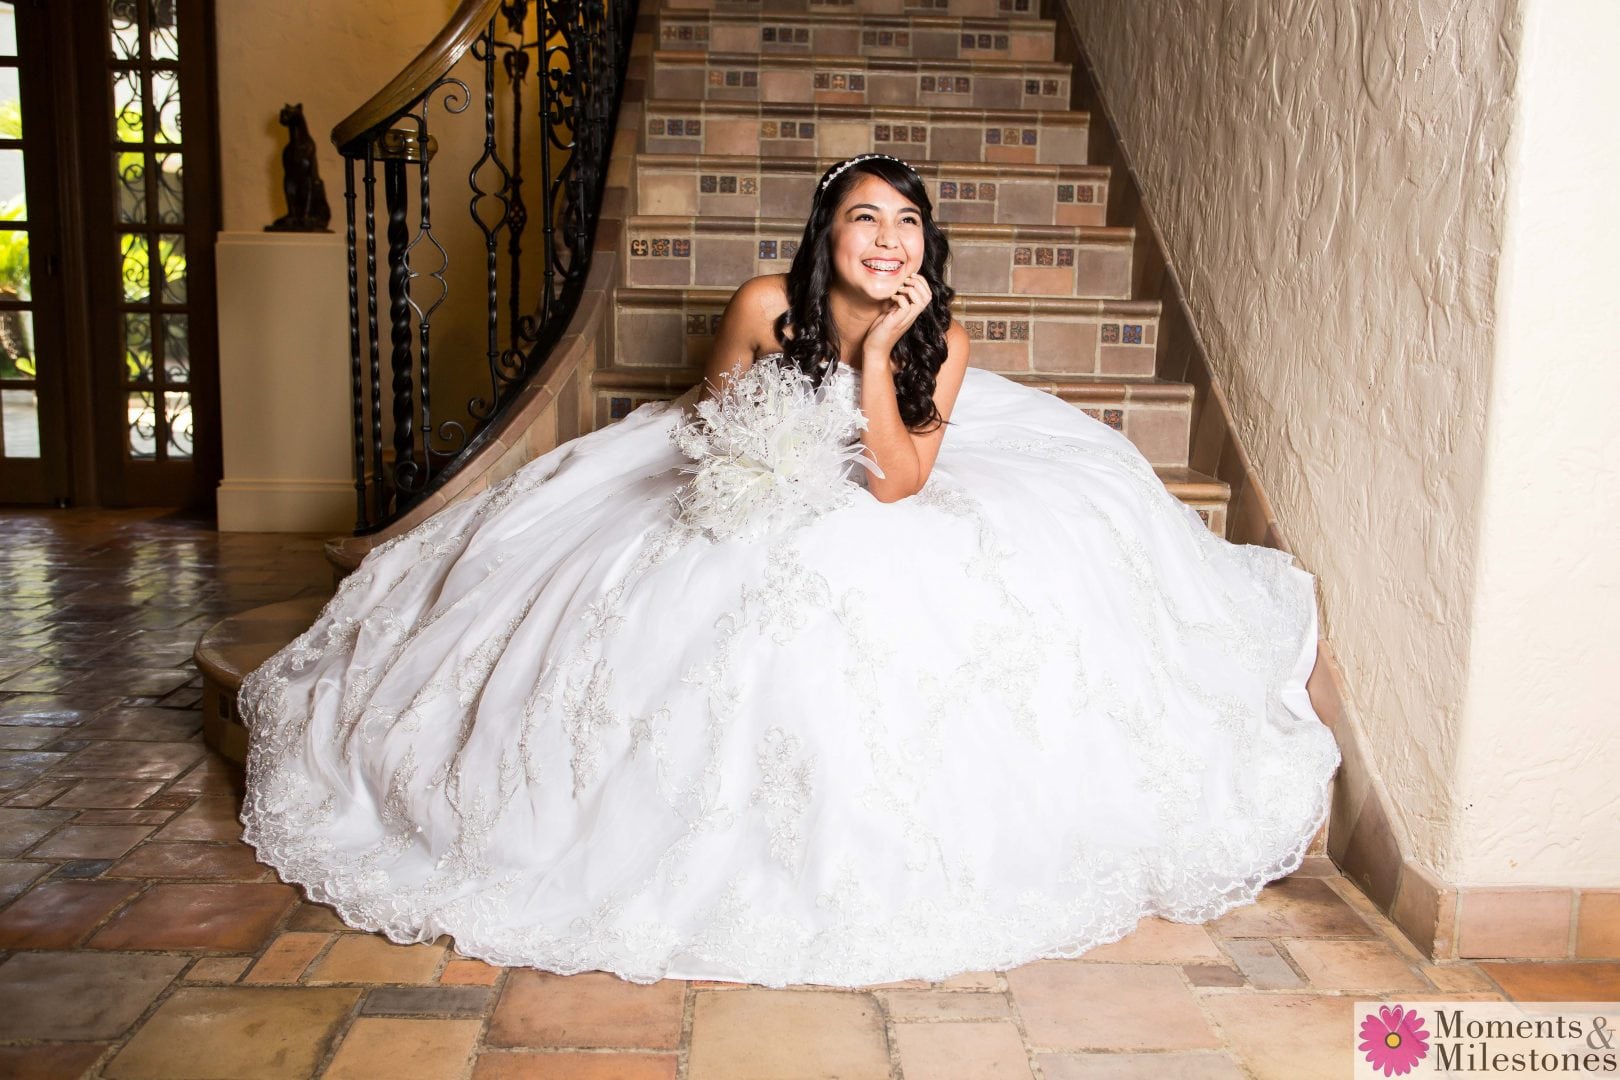 Sweetest Quince Session You’ll See All Day!!